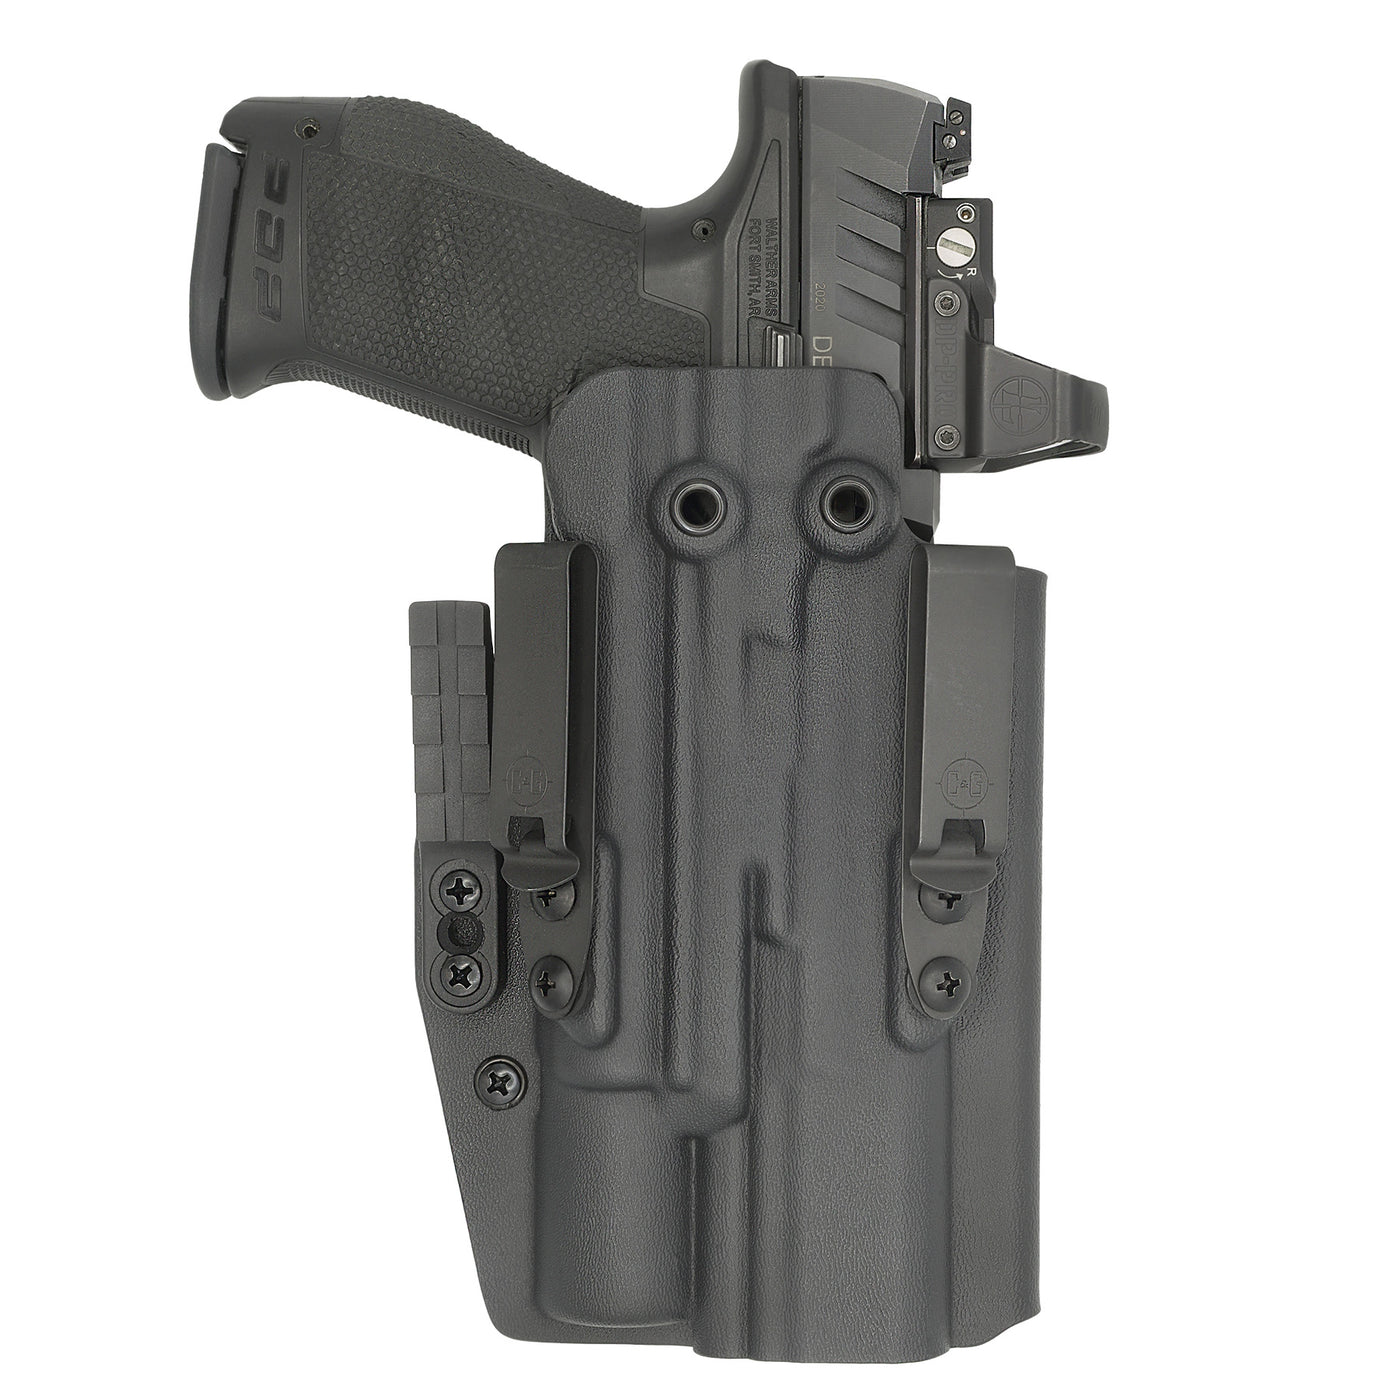 C&G Holsters custom IWB ALPHA UPGRADE Tactical S&W M&P 9/40 Surefire X300 in holstered position